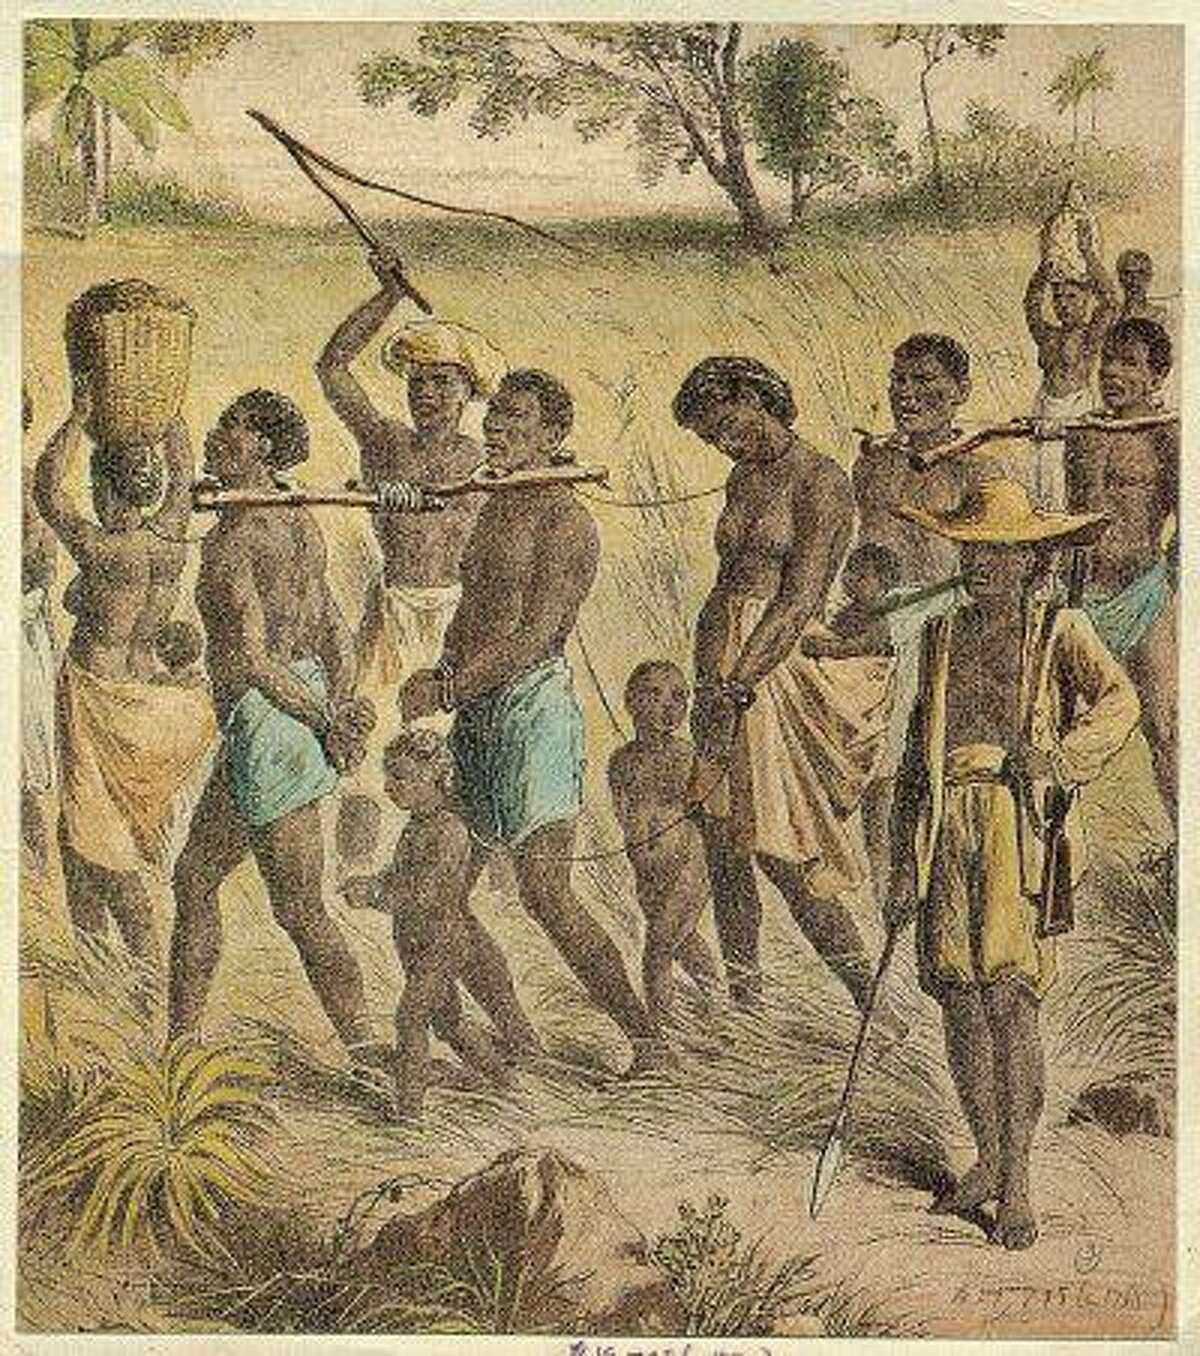 This is an undated photo of an illustrated depiction of slaves in captivity. (AP Photo)